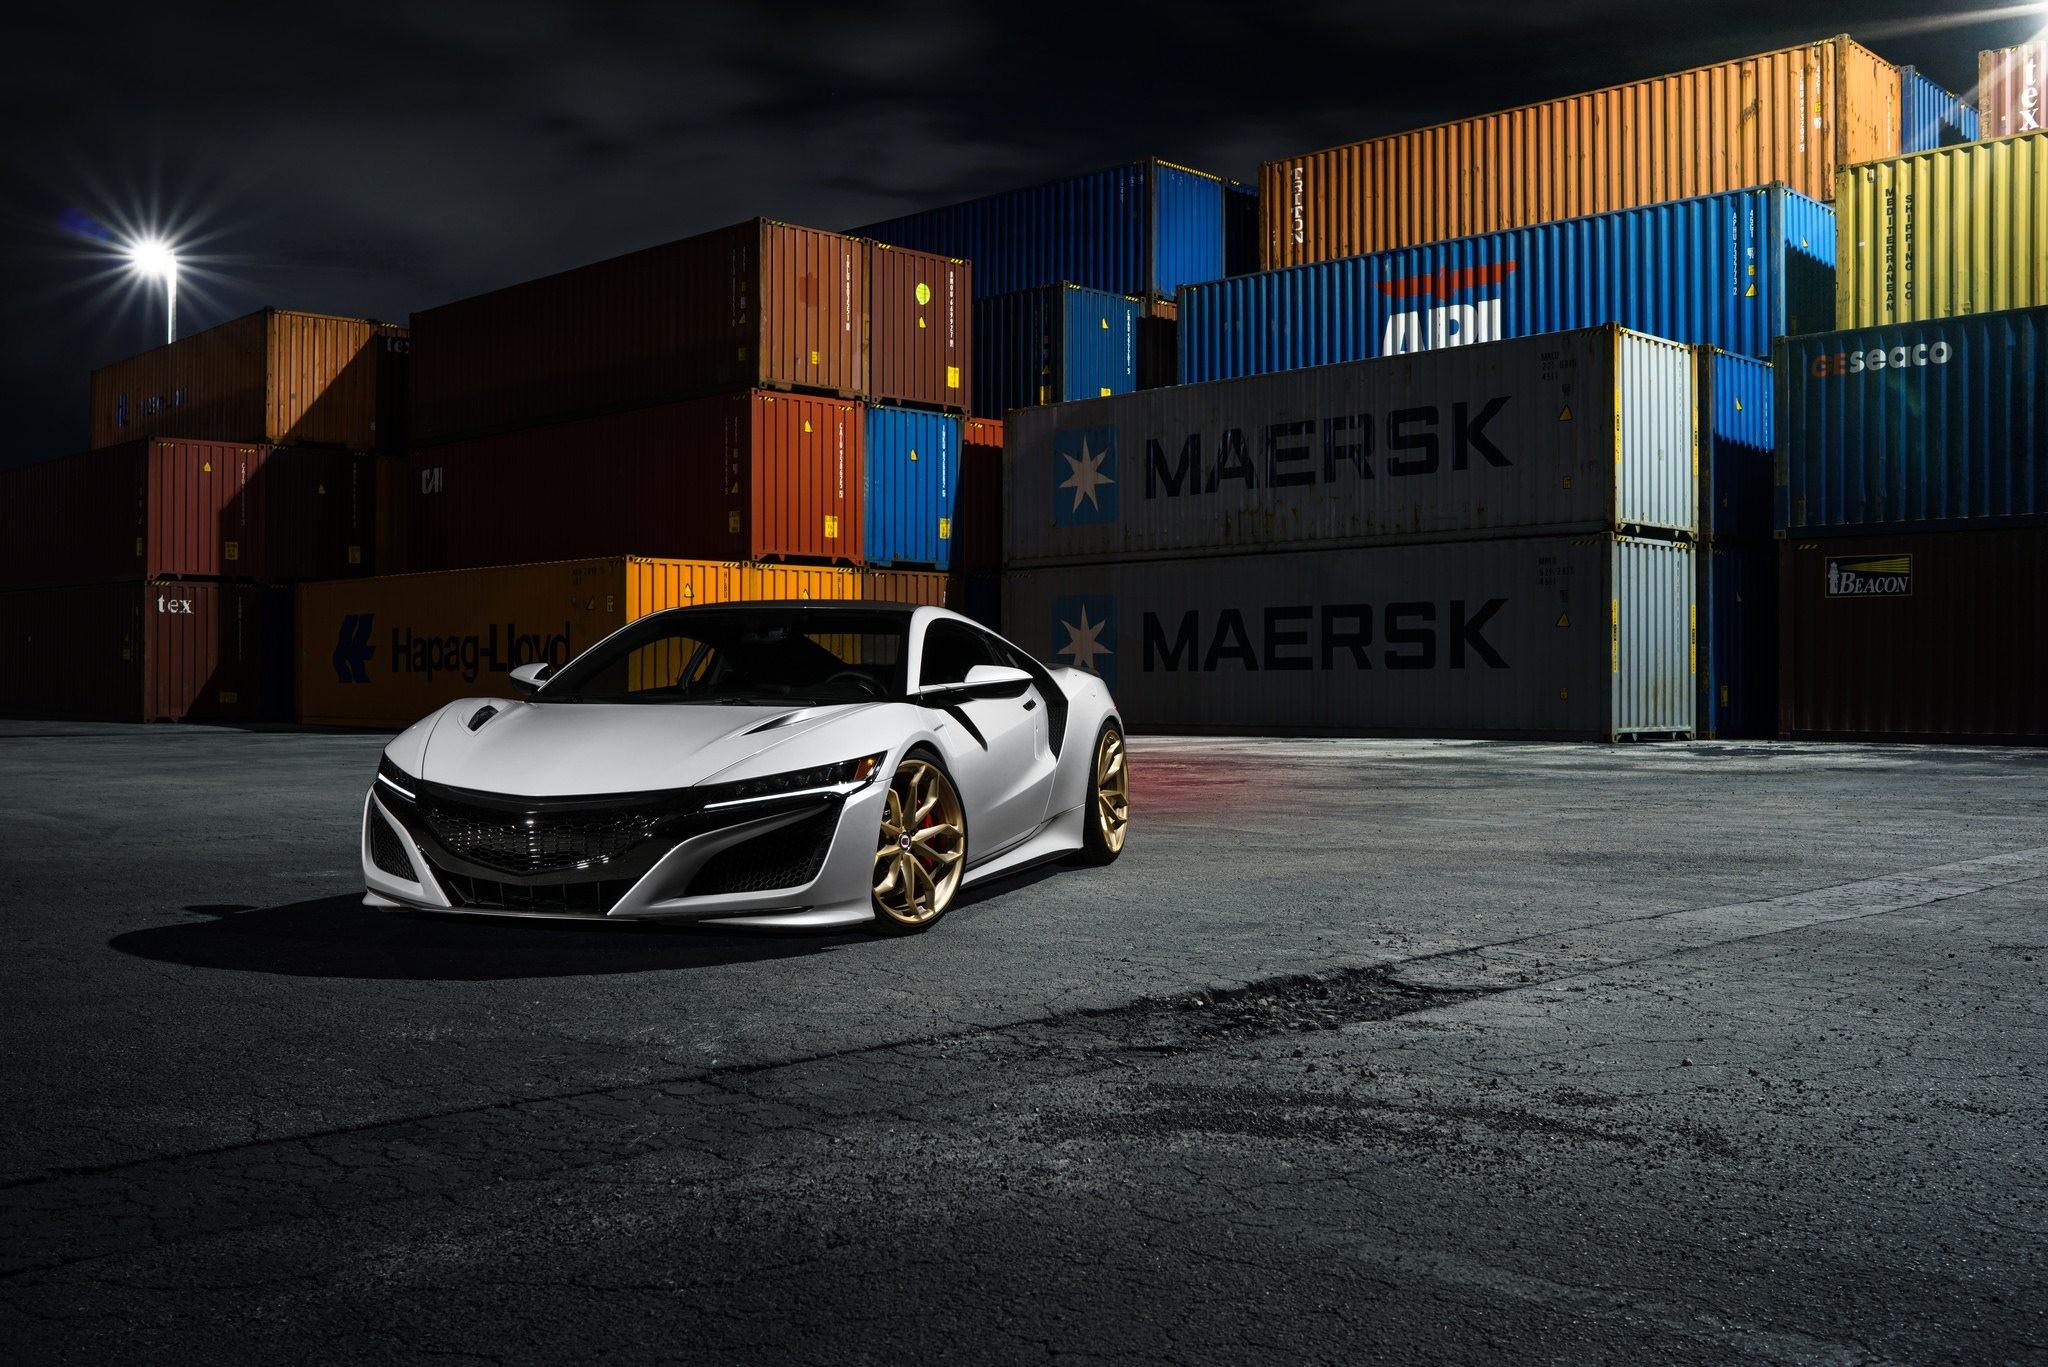 Acura Nsx Wallpaper background picture